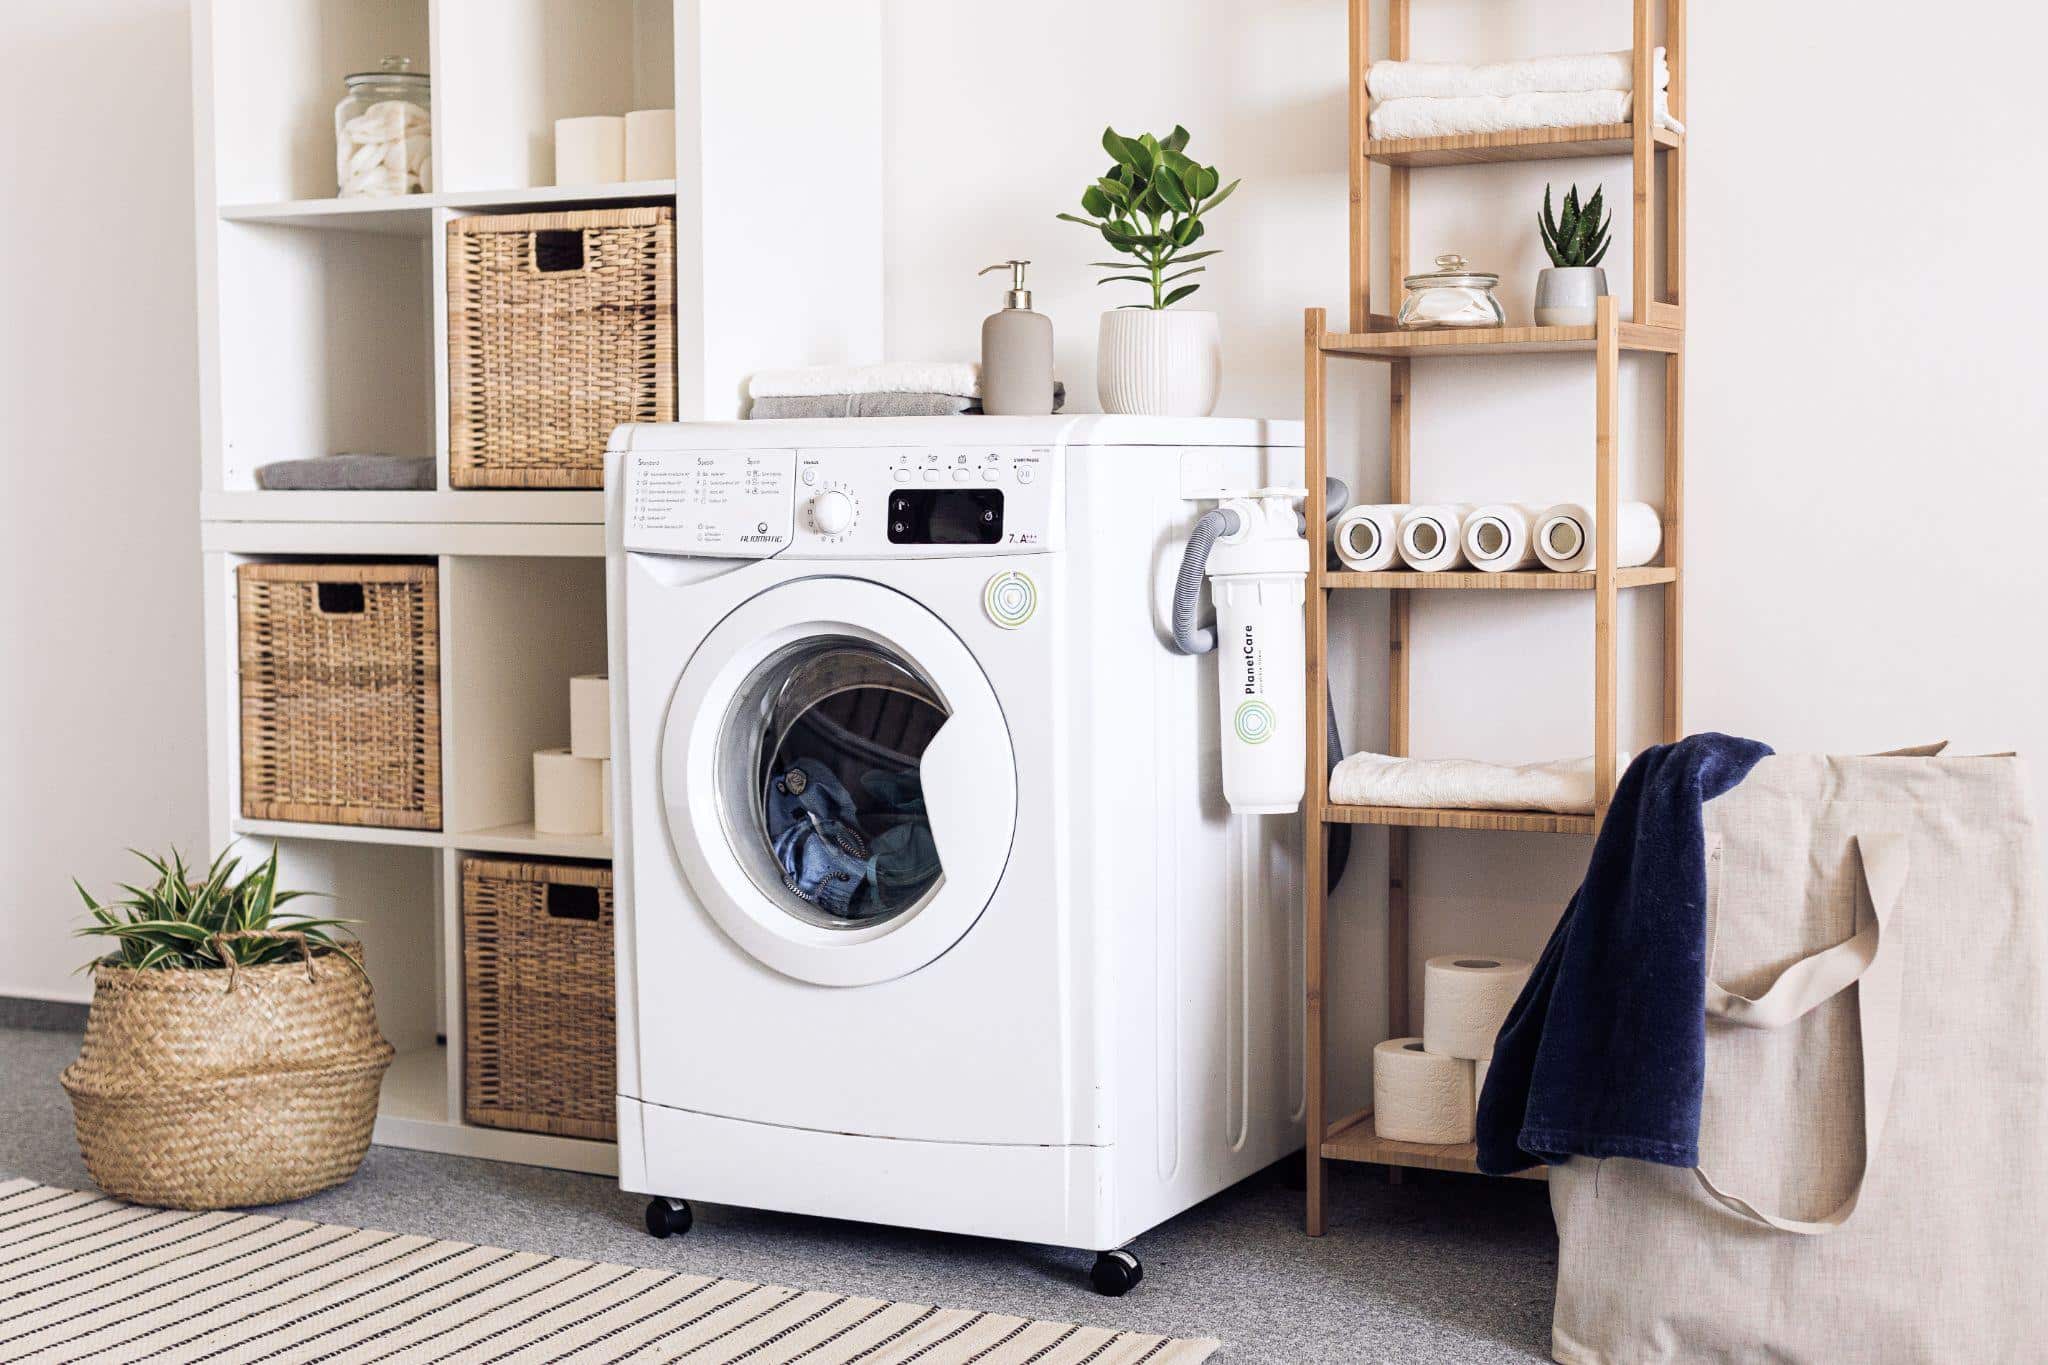 Clever Design Features for At-Home Laundry Rooms